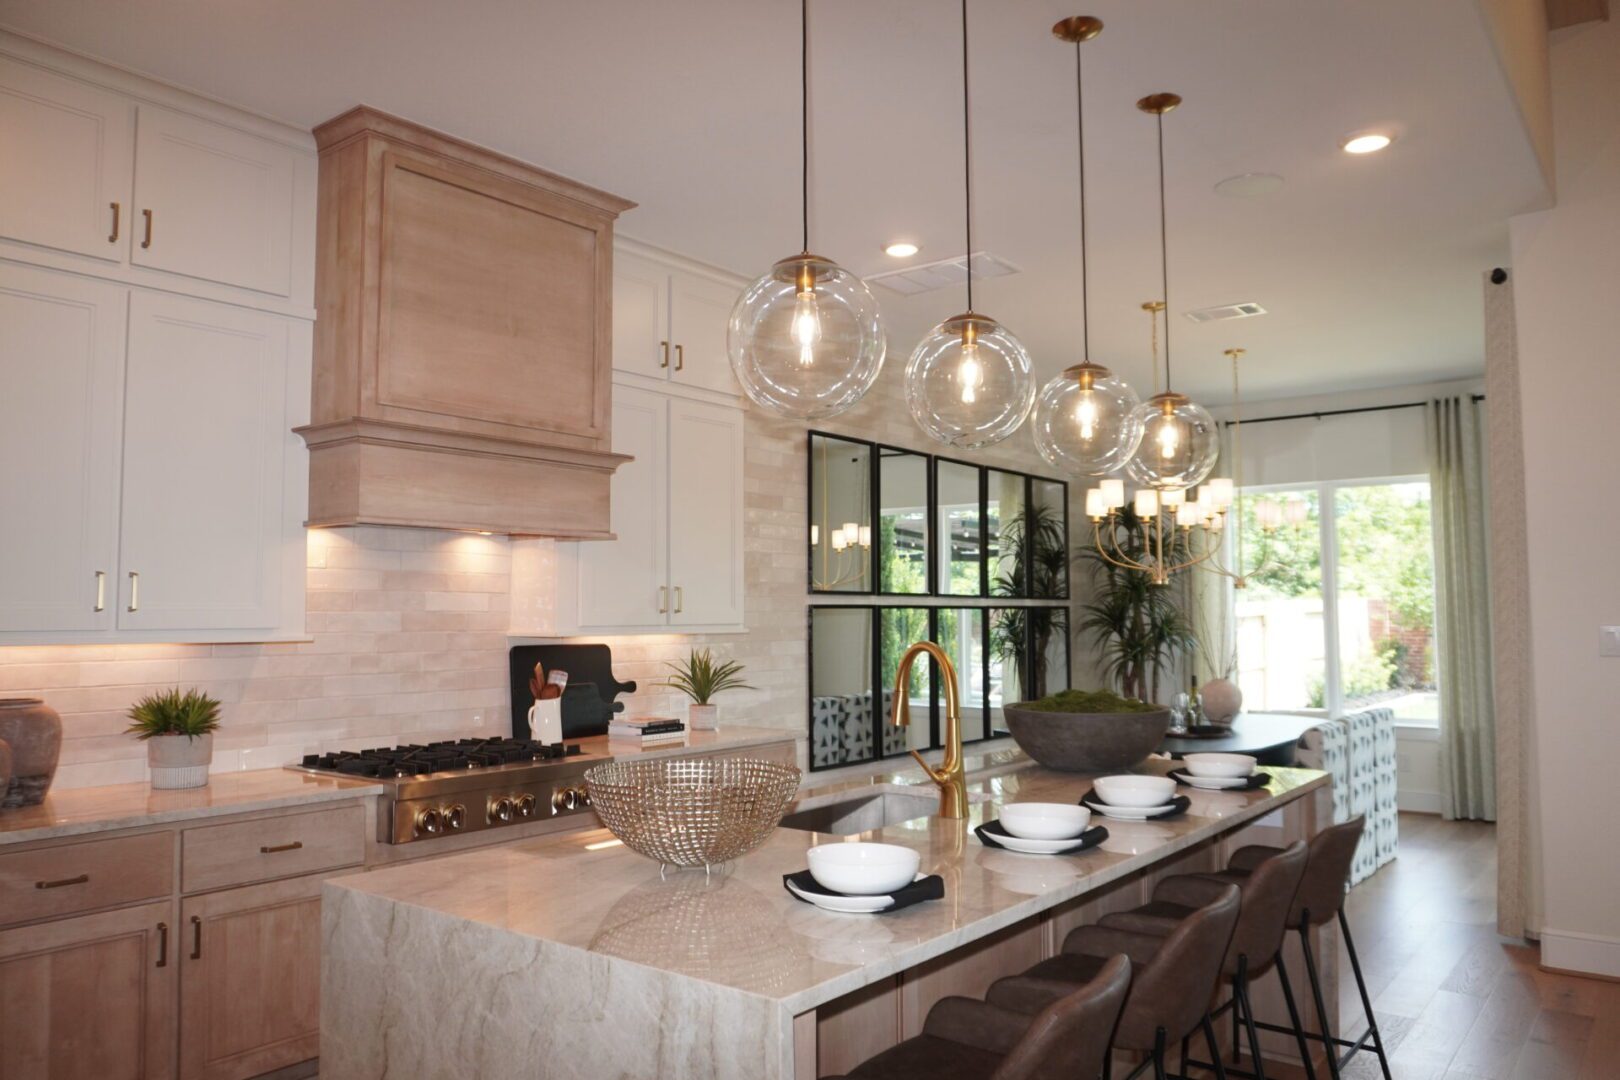 A kitchen with marble counter tops and hanging lights.